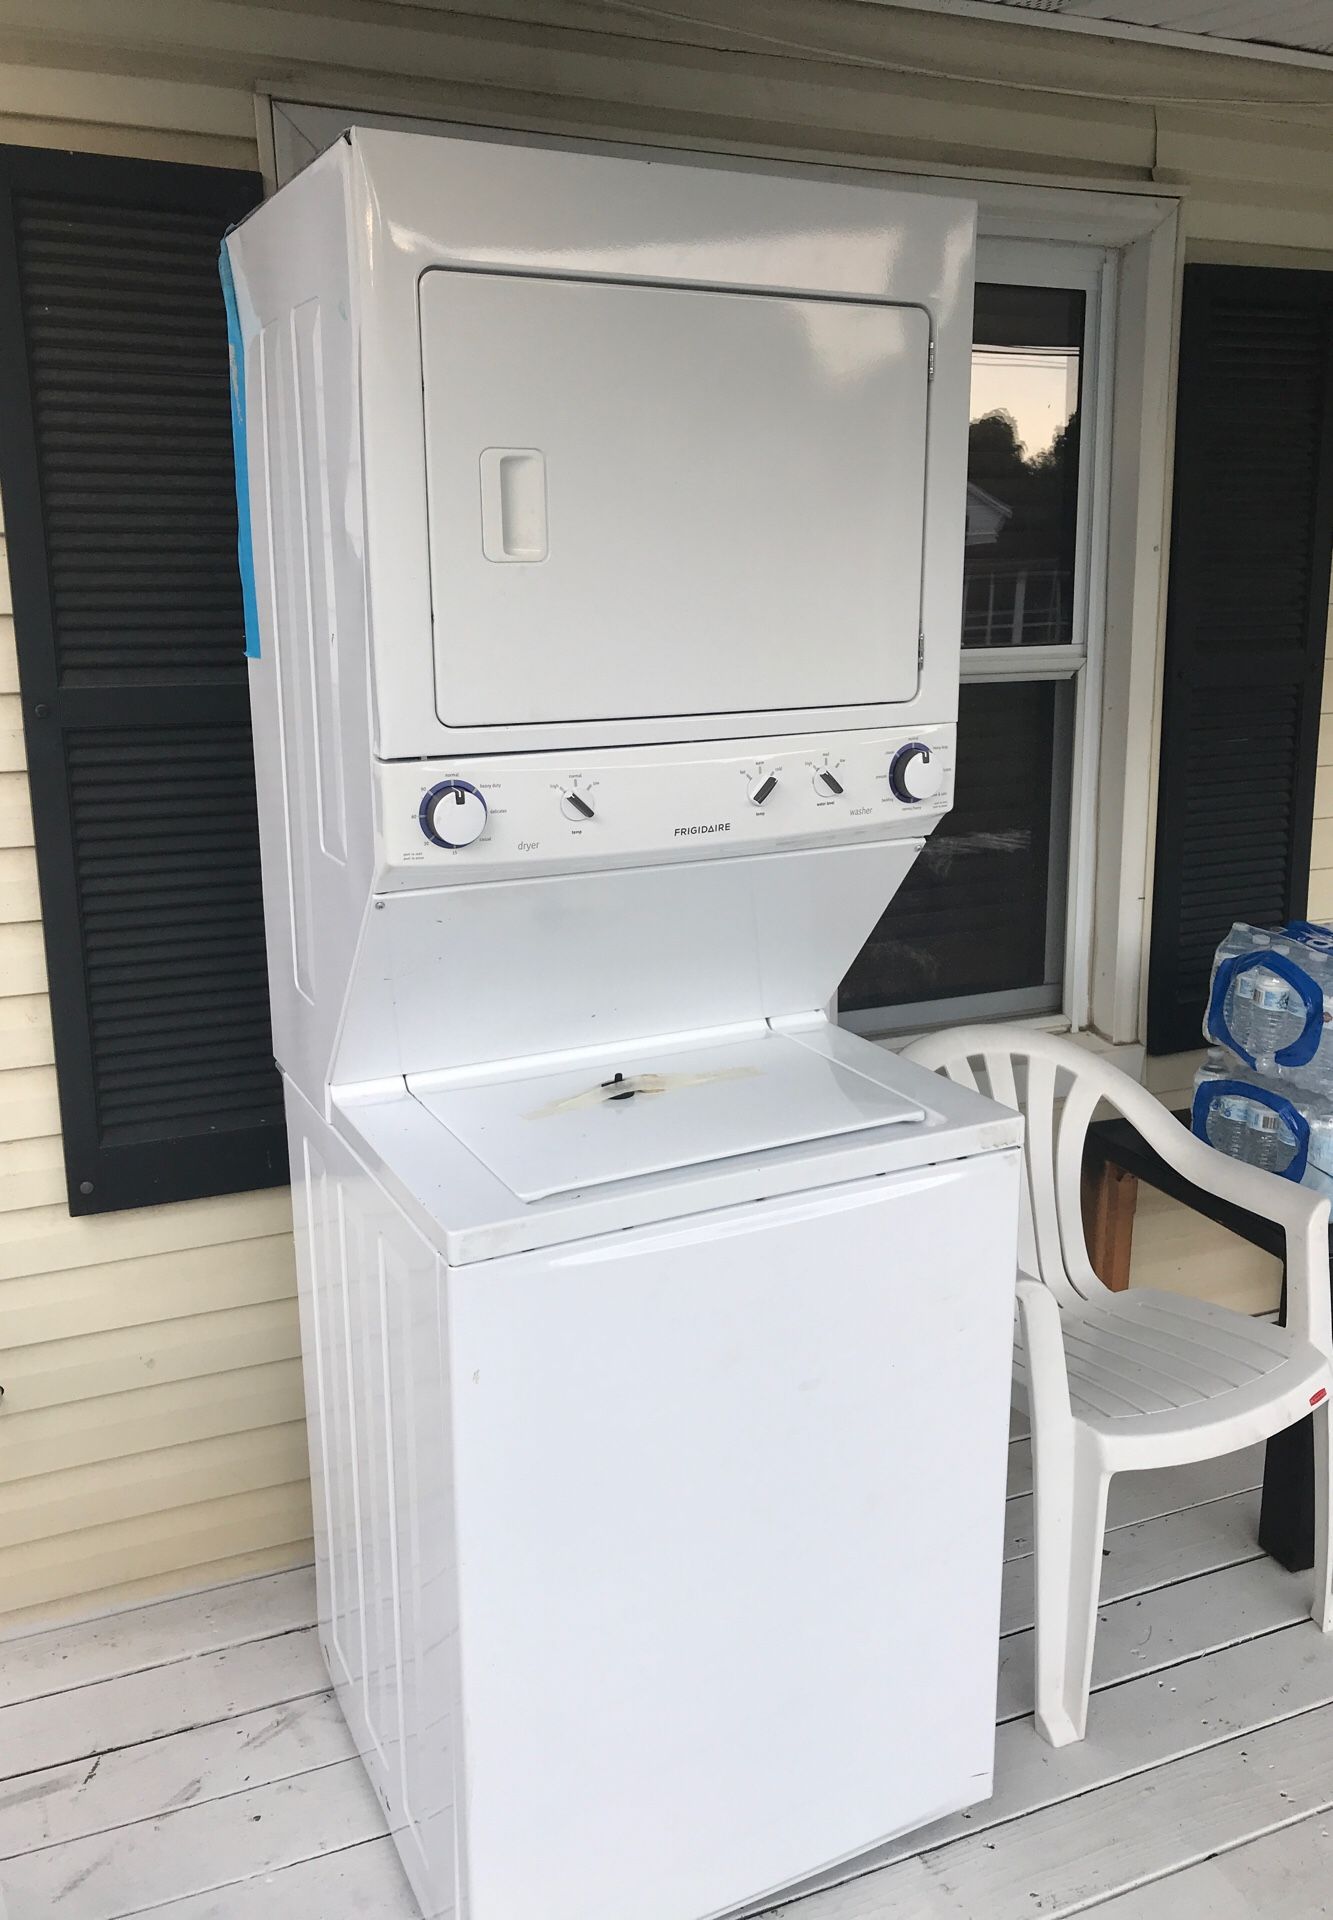 Frigidaire stackable washer and dryer $100